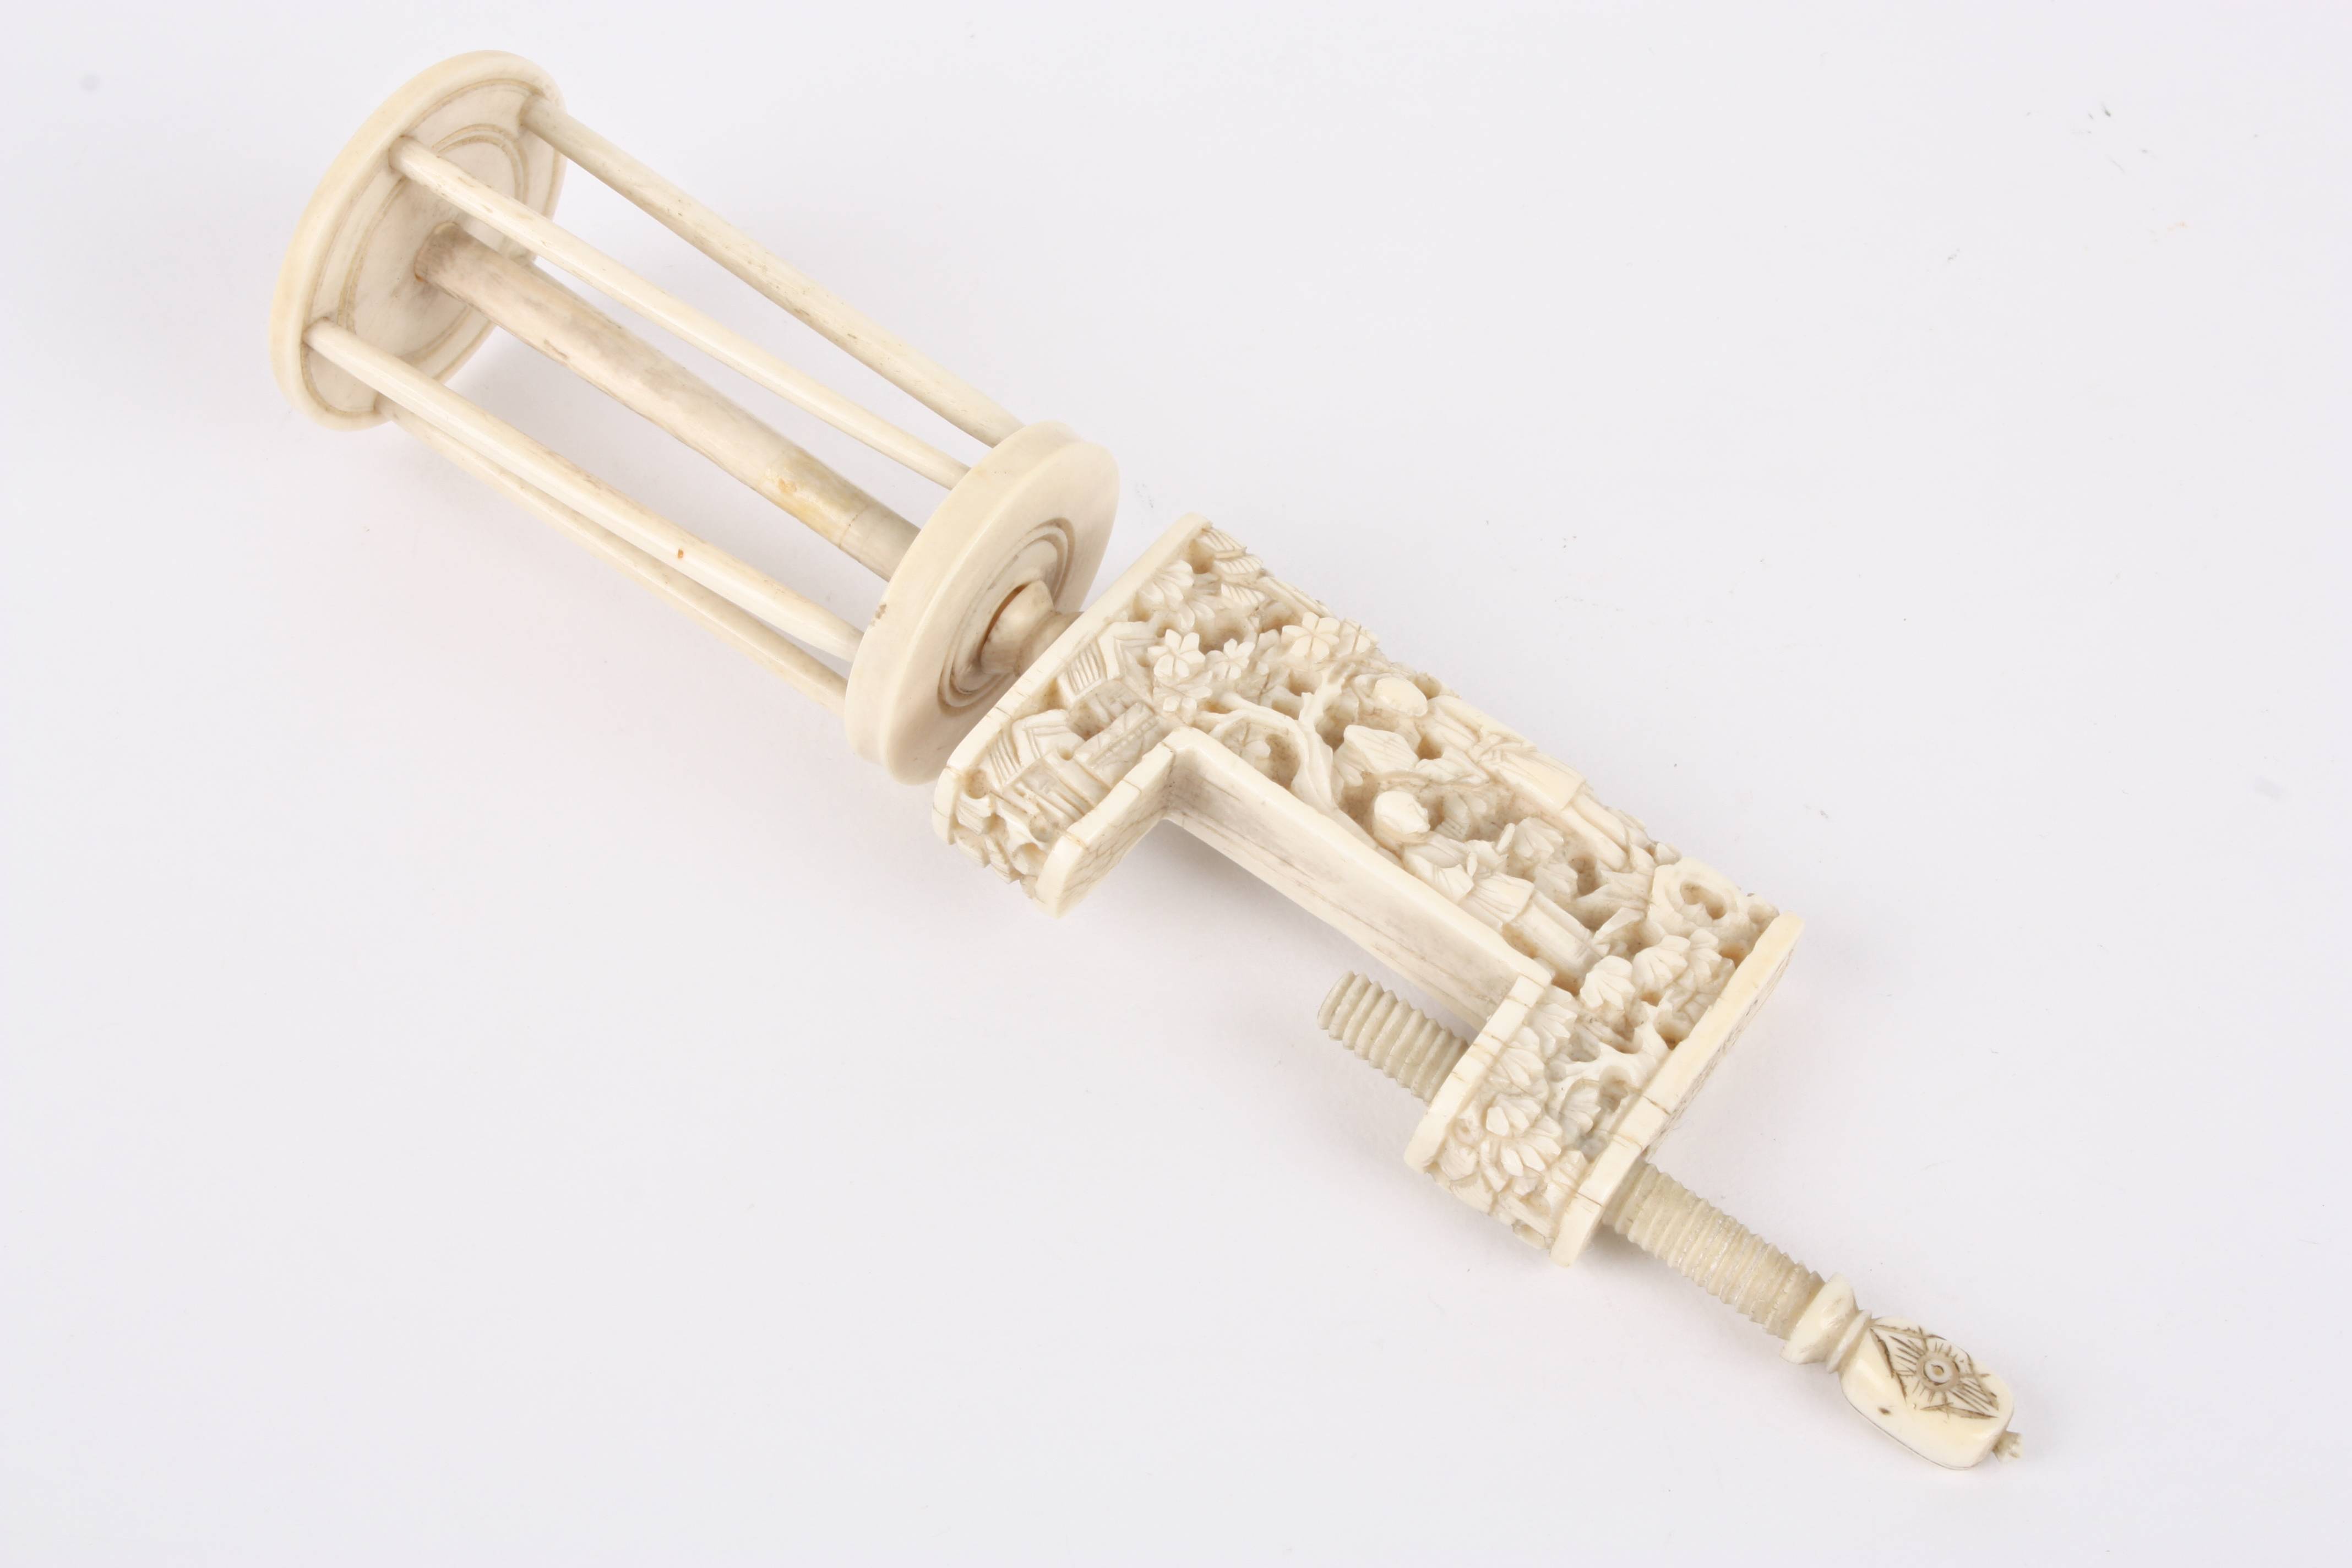 A late 19th century Chinese canton ivory bobbin clamp carved with figures, buildings and foliage. - Image 2 of 3